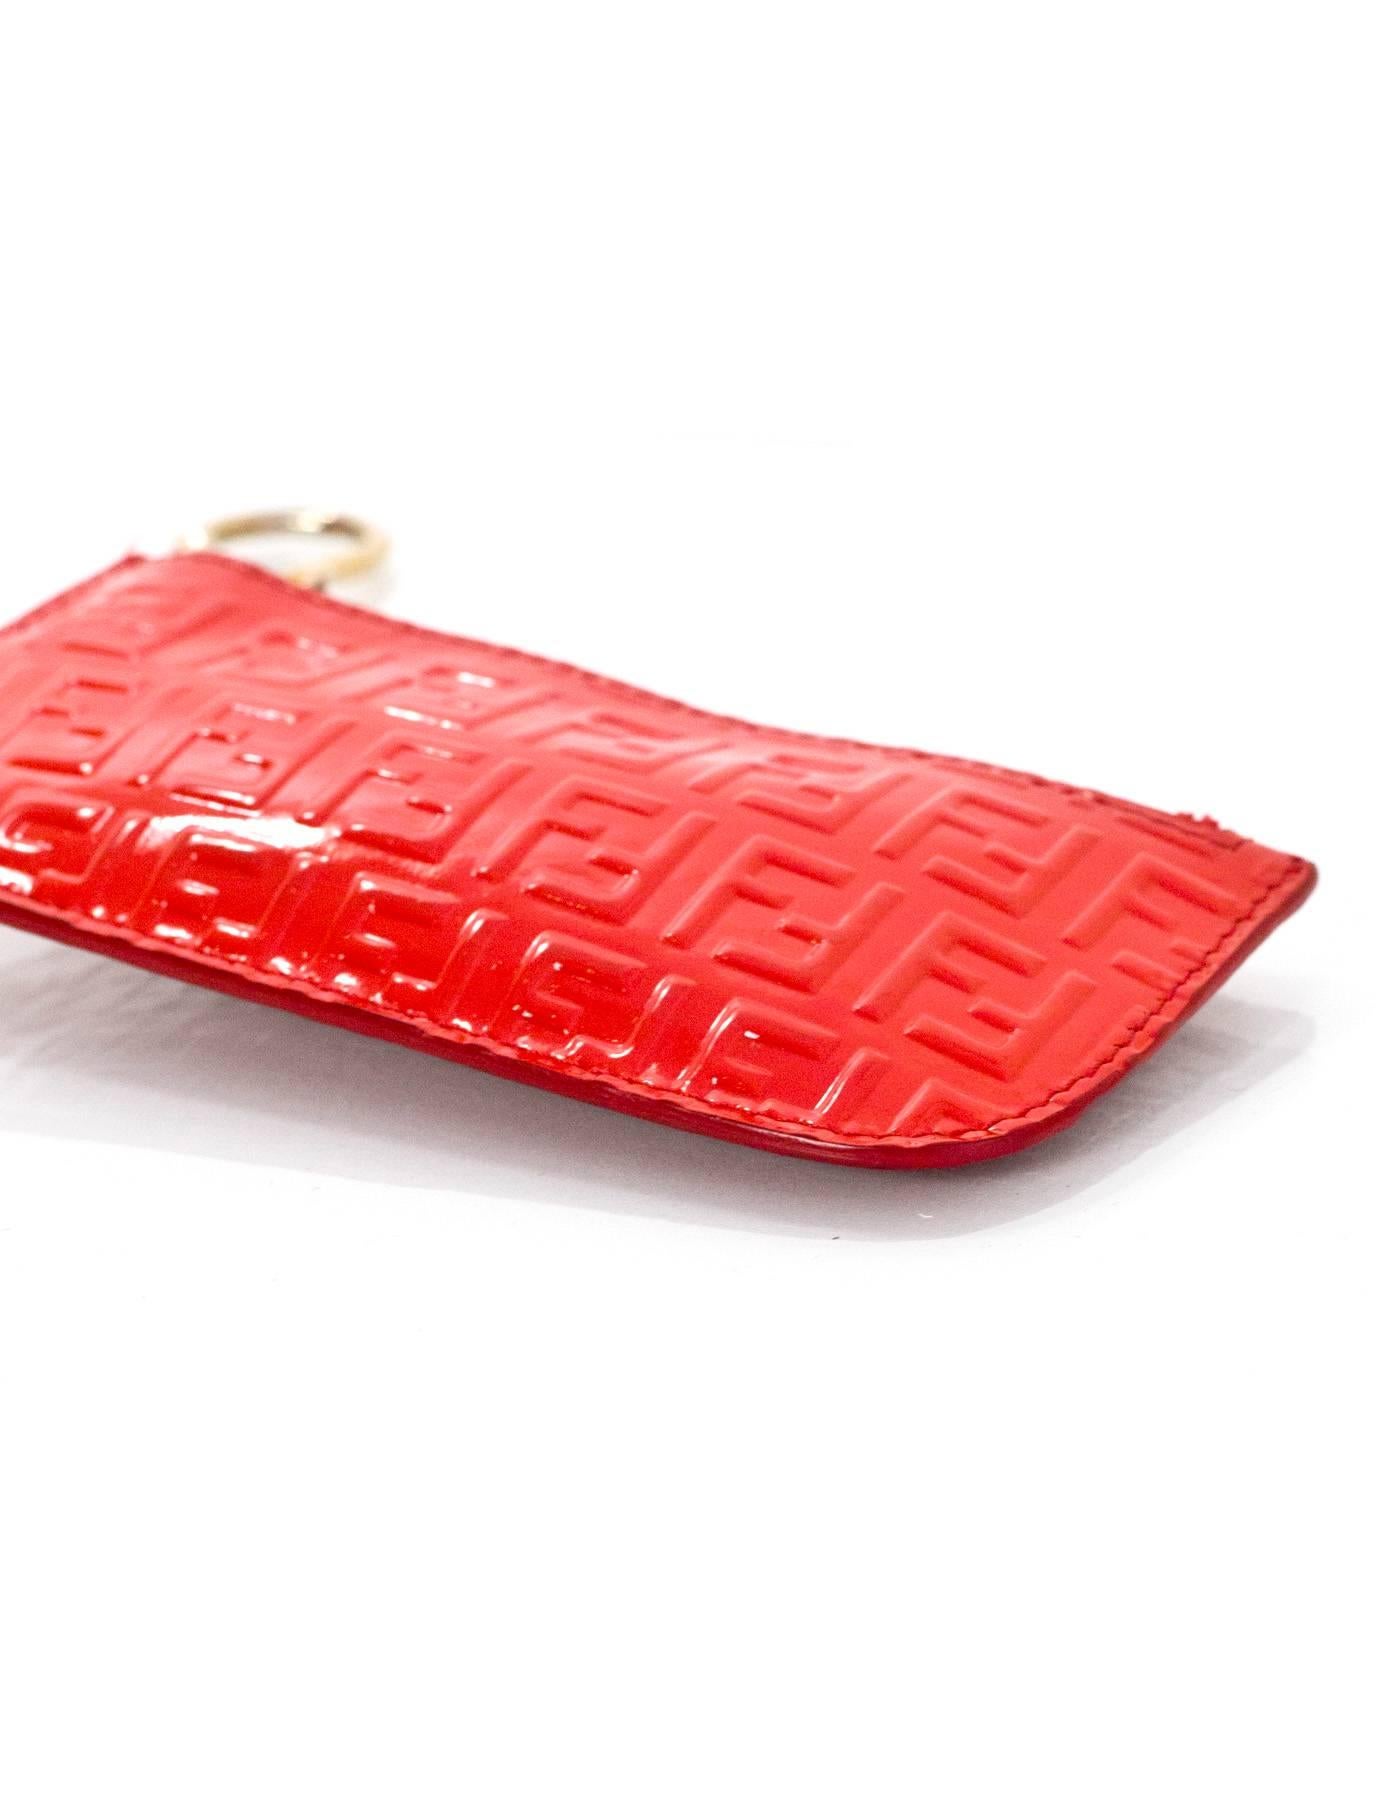 Fendi Red Patent Leather Card Case/Key Chain with Box and DB 1